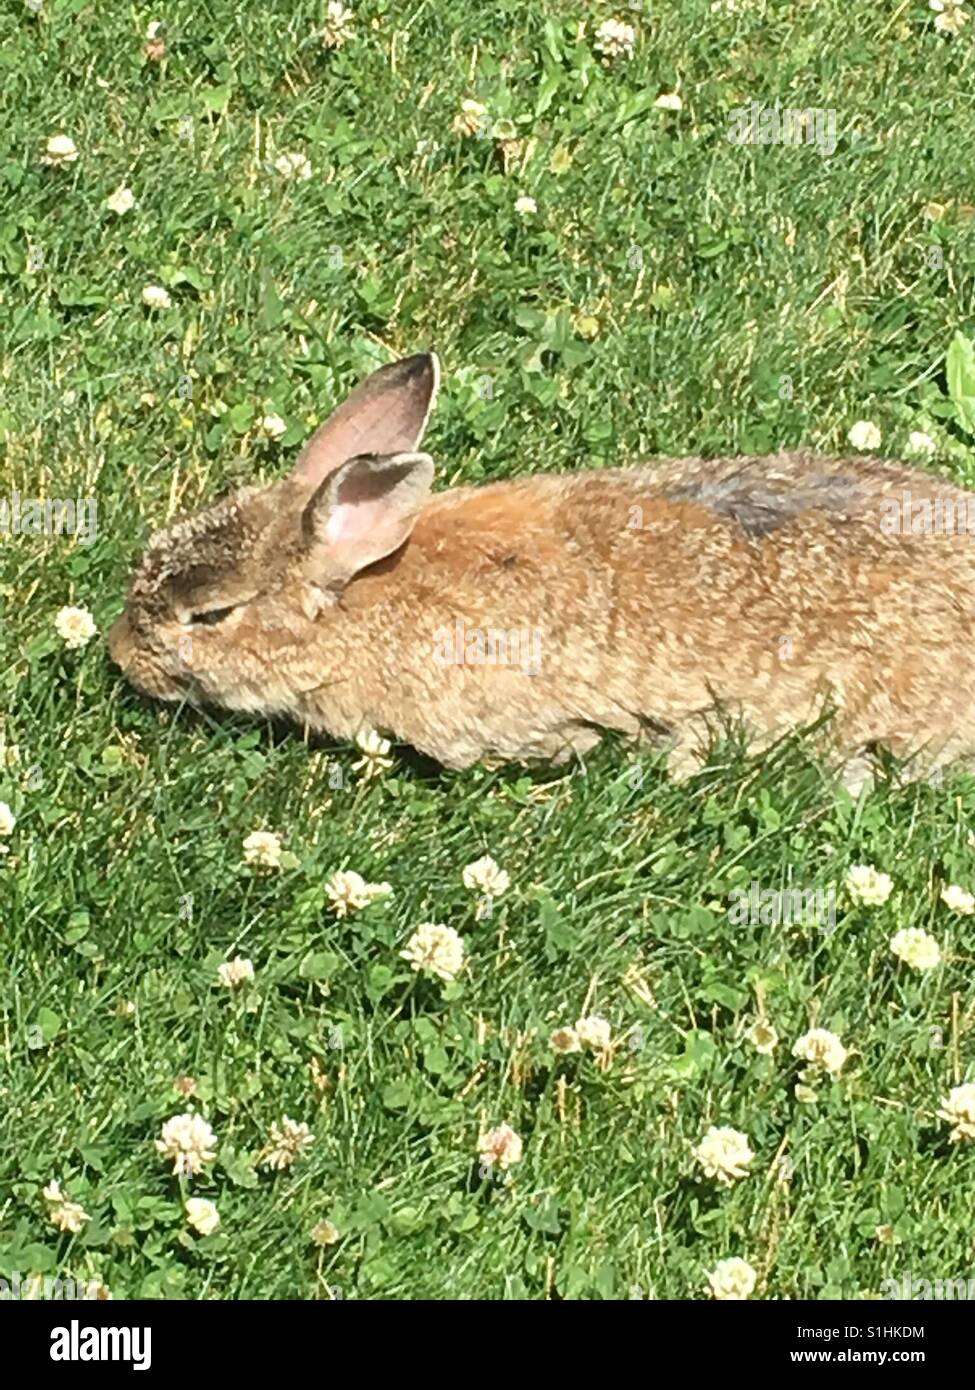 Feral brown rabbit eating clover Stock Photo